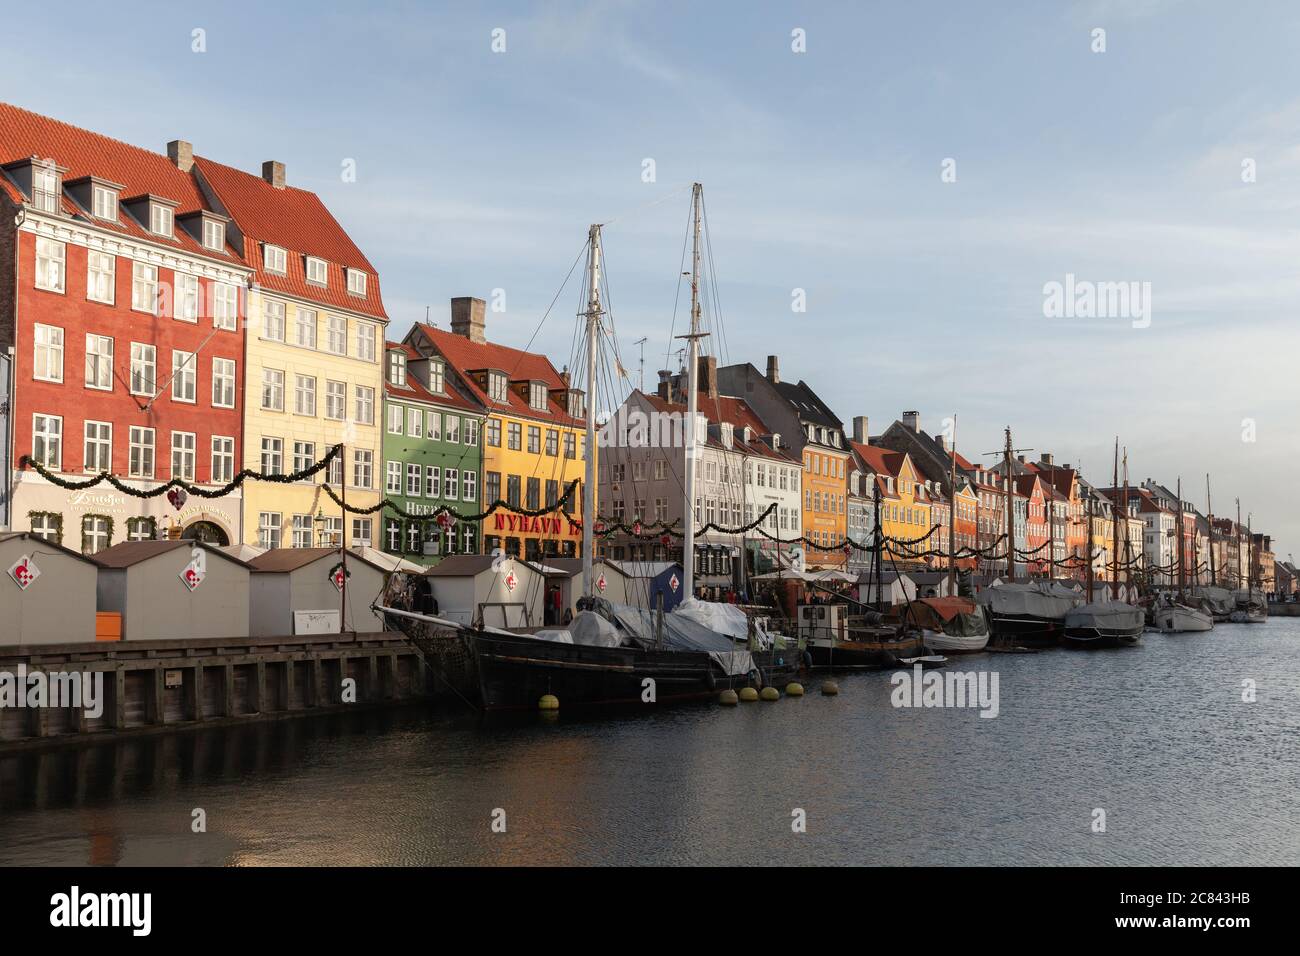 Copenhagen, Denmark - December 10, 2017: Nyhavn or New Harbour at sunny day, it is a 17th-century waterfront, canal and popular touristic destination Stock Photo